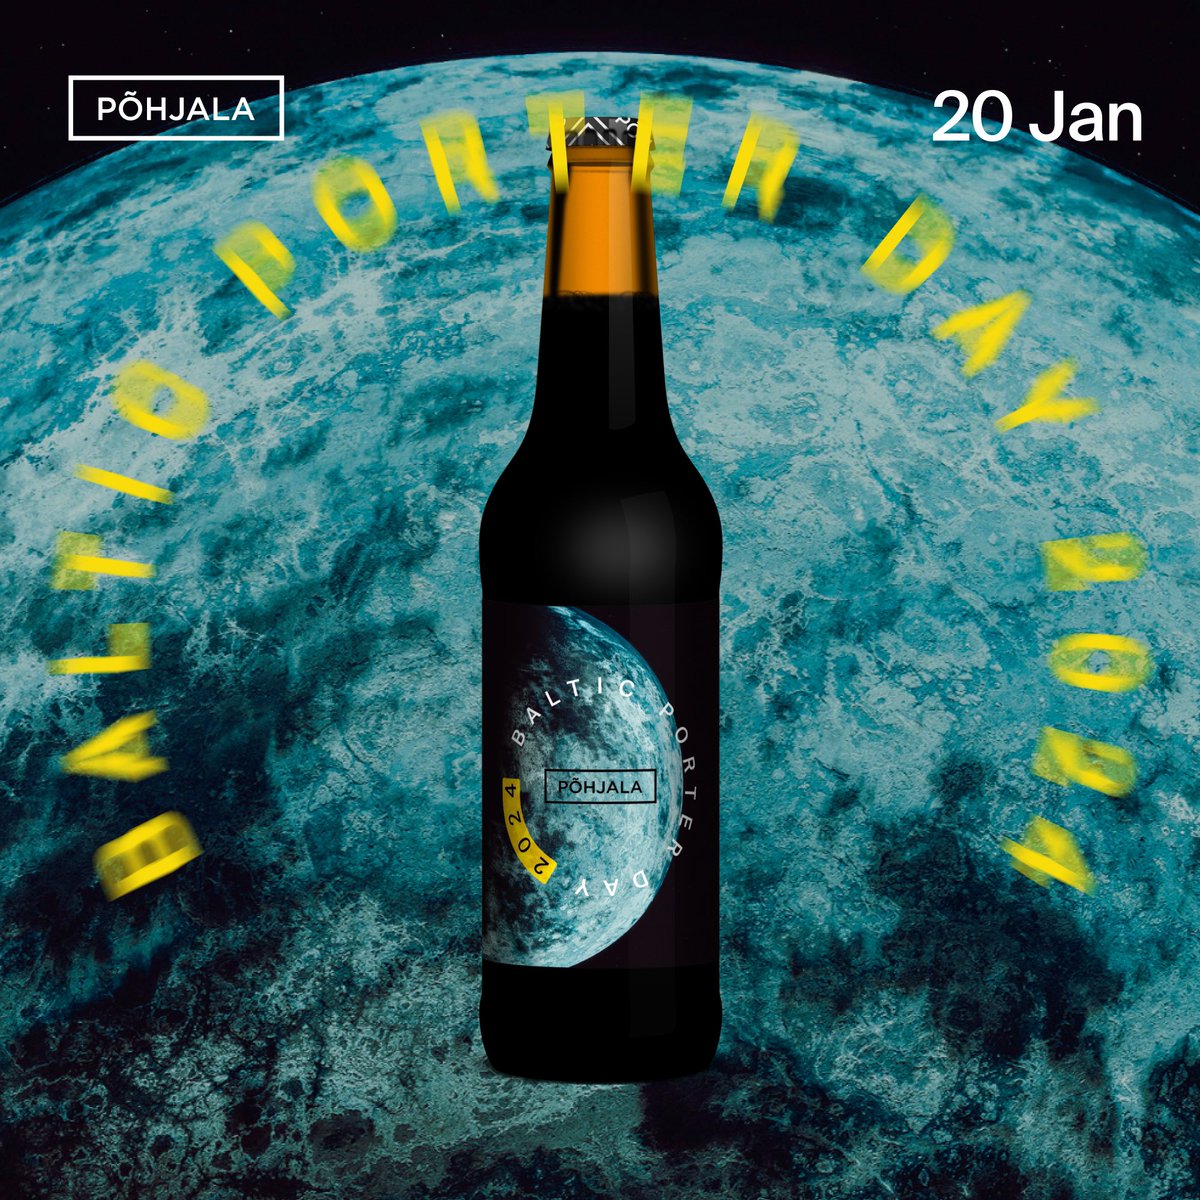 Celebrating BPD with this indulgent Baltic Porter, brewed with plenty of malted rye and dried coffee cherries. This liquid treat seeks to capture the contrast between the cold and snowy winter landscapes and the warmth found in cosy Estonian homes. CHEERS! 🖤🌚